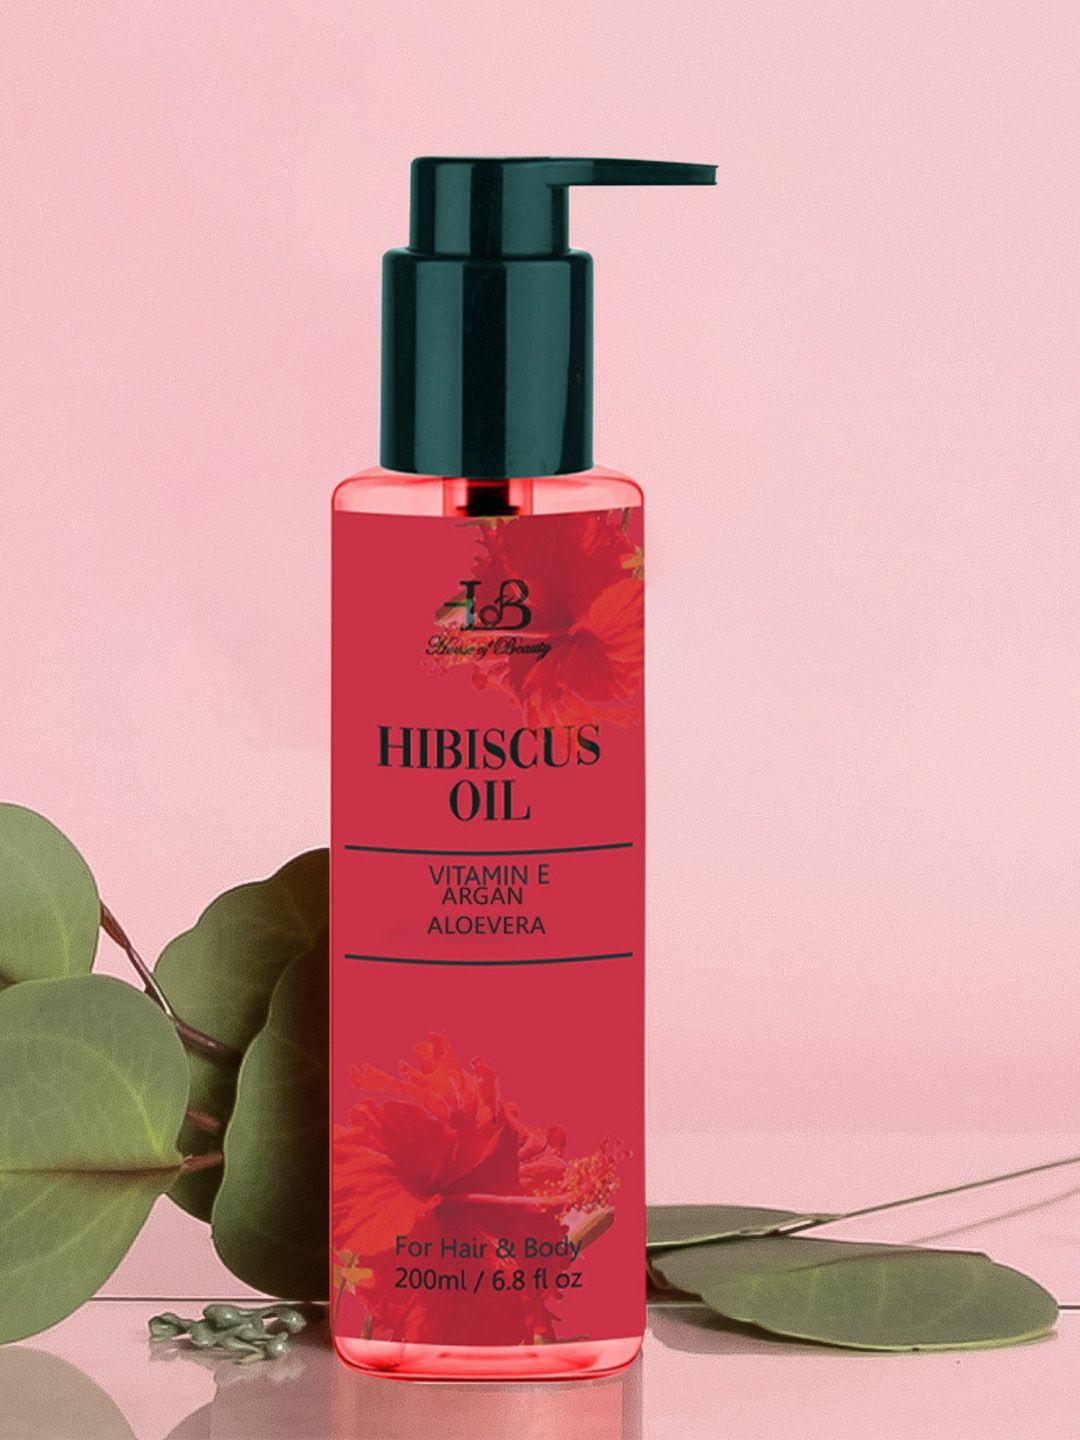 House of Beauty Hibiscus Oil for Hair & Body with Vit E+Argan+Aloevera - 200 ml